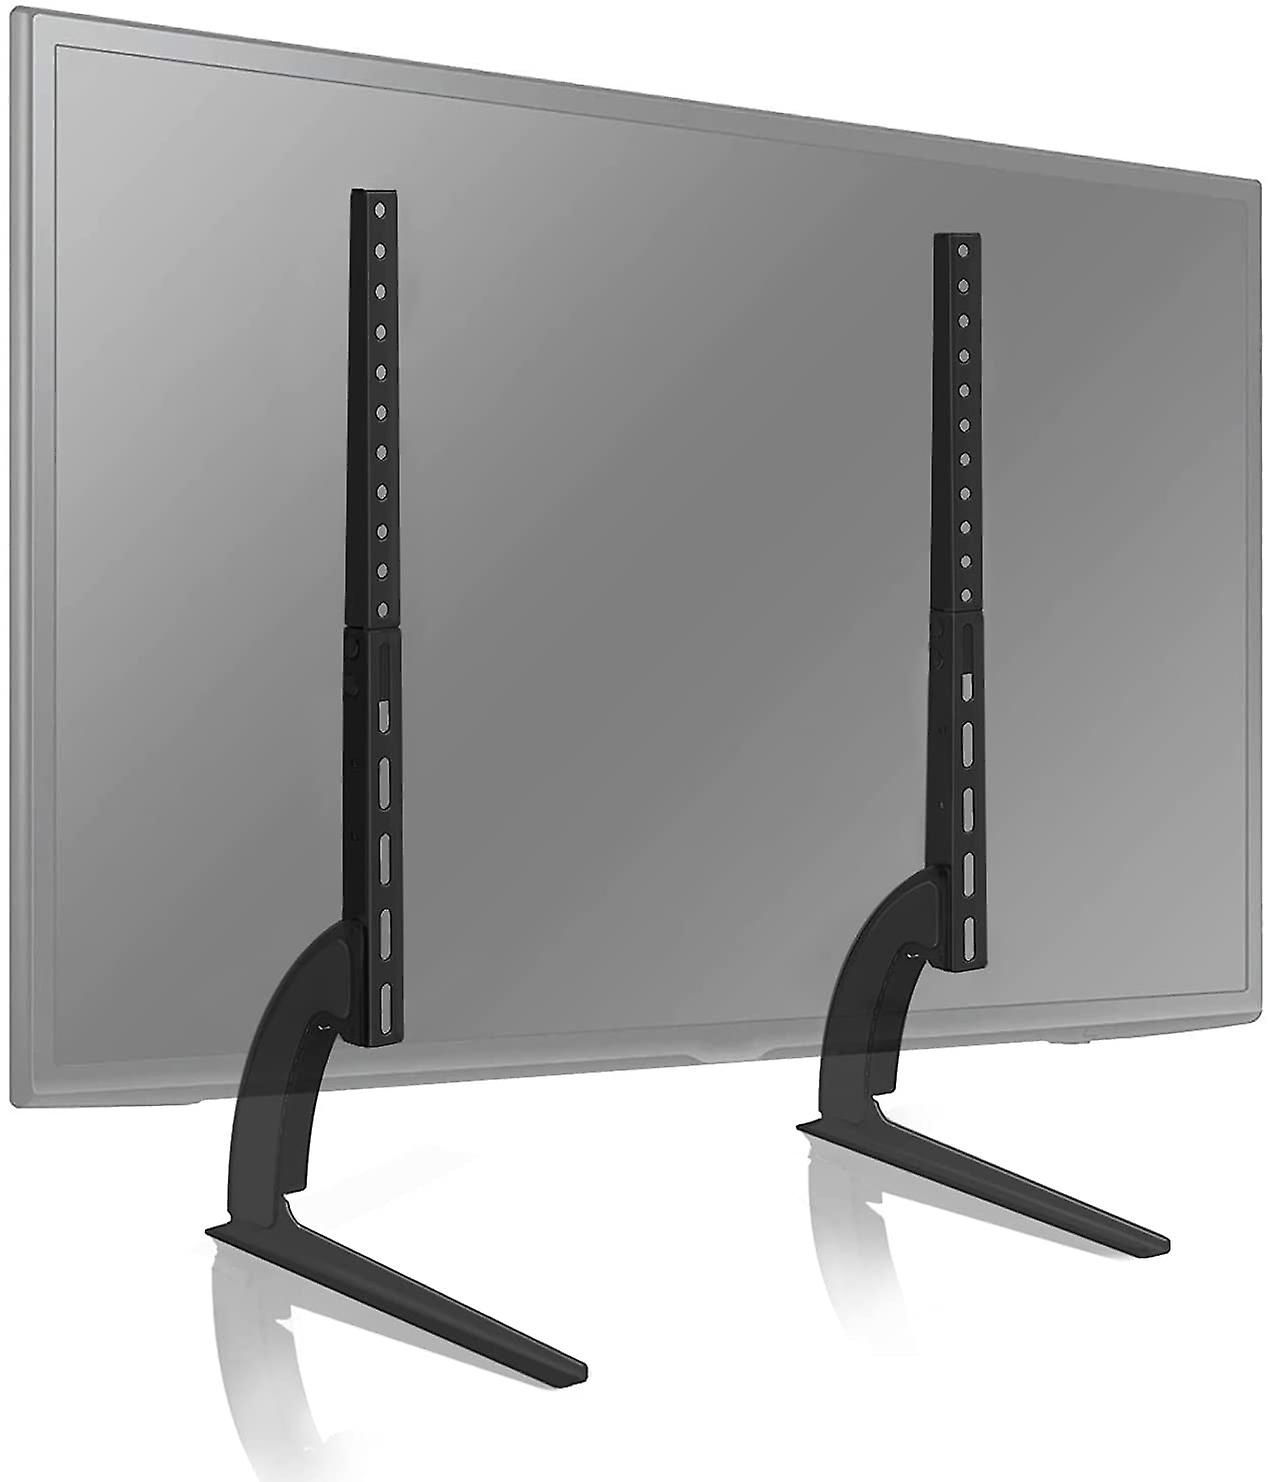 27 65 Inch Tvstavr Universal Table Top Tv Stand For Most 27 30 32 37 40 42  47 50 55 60 65 Inch Plasma Lcd Led Flat Or Curved Screen Tvs With Height Ad  | Fruugo It Inside Universal Tabletop Tv Stands (Photo 1 of 15)